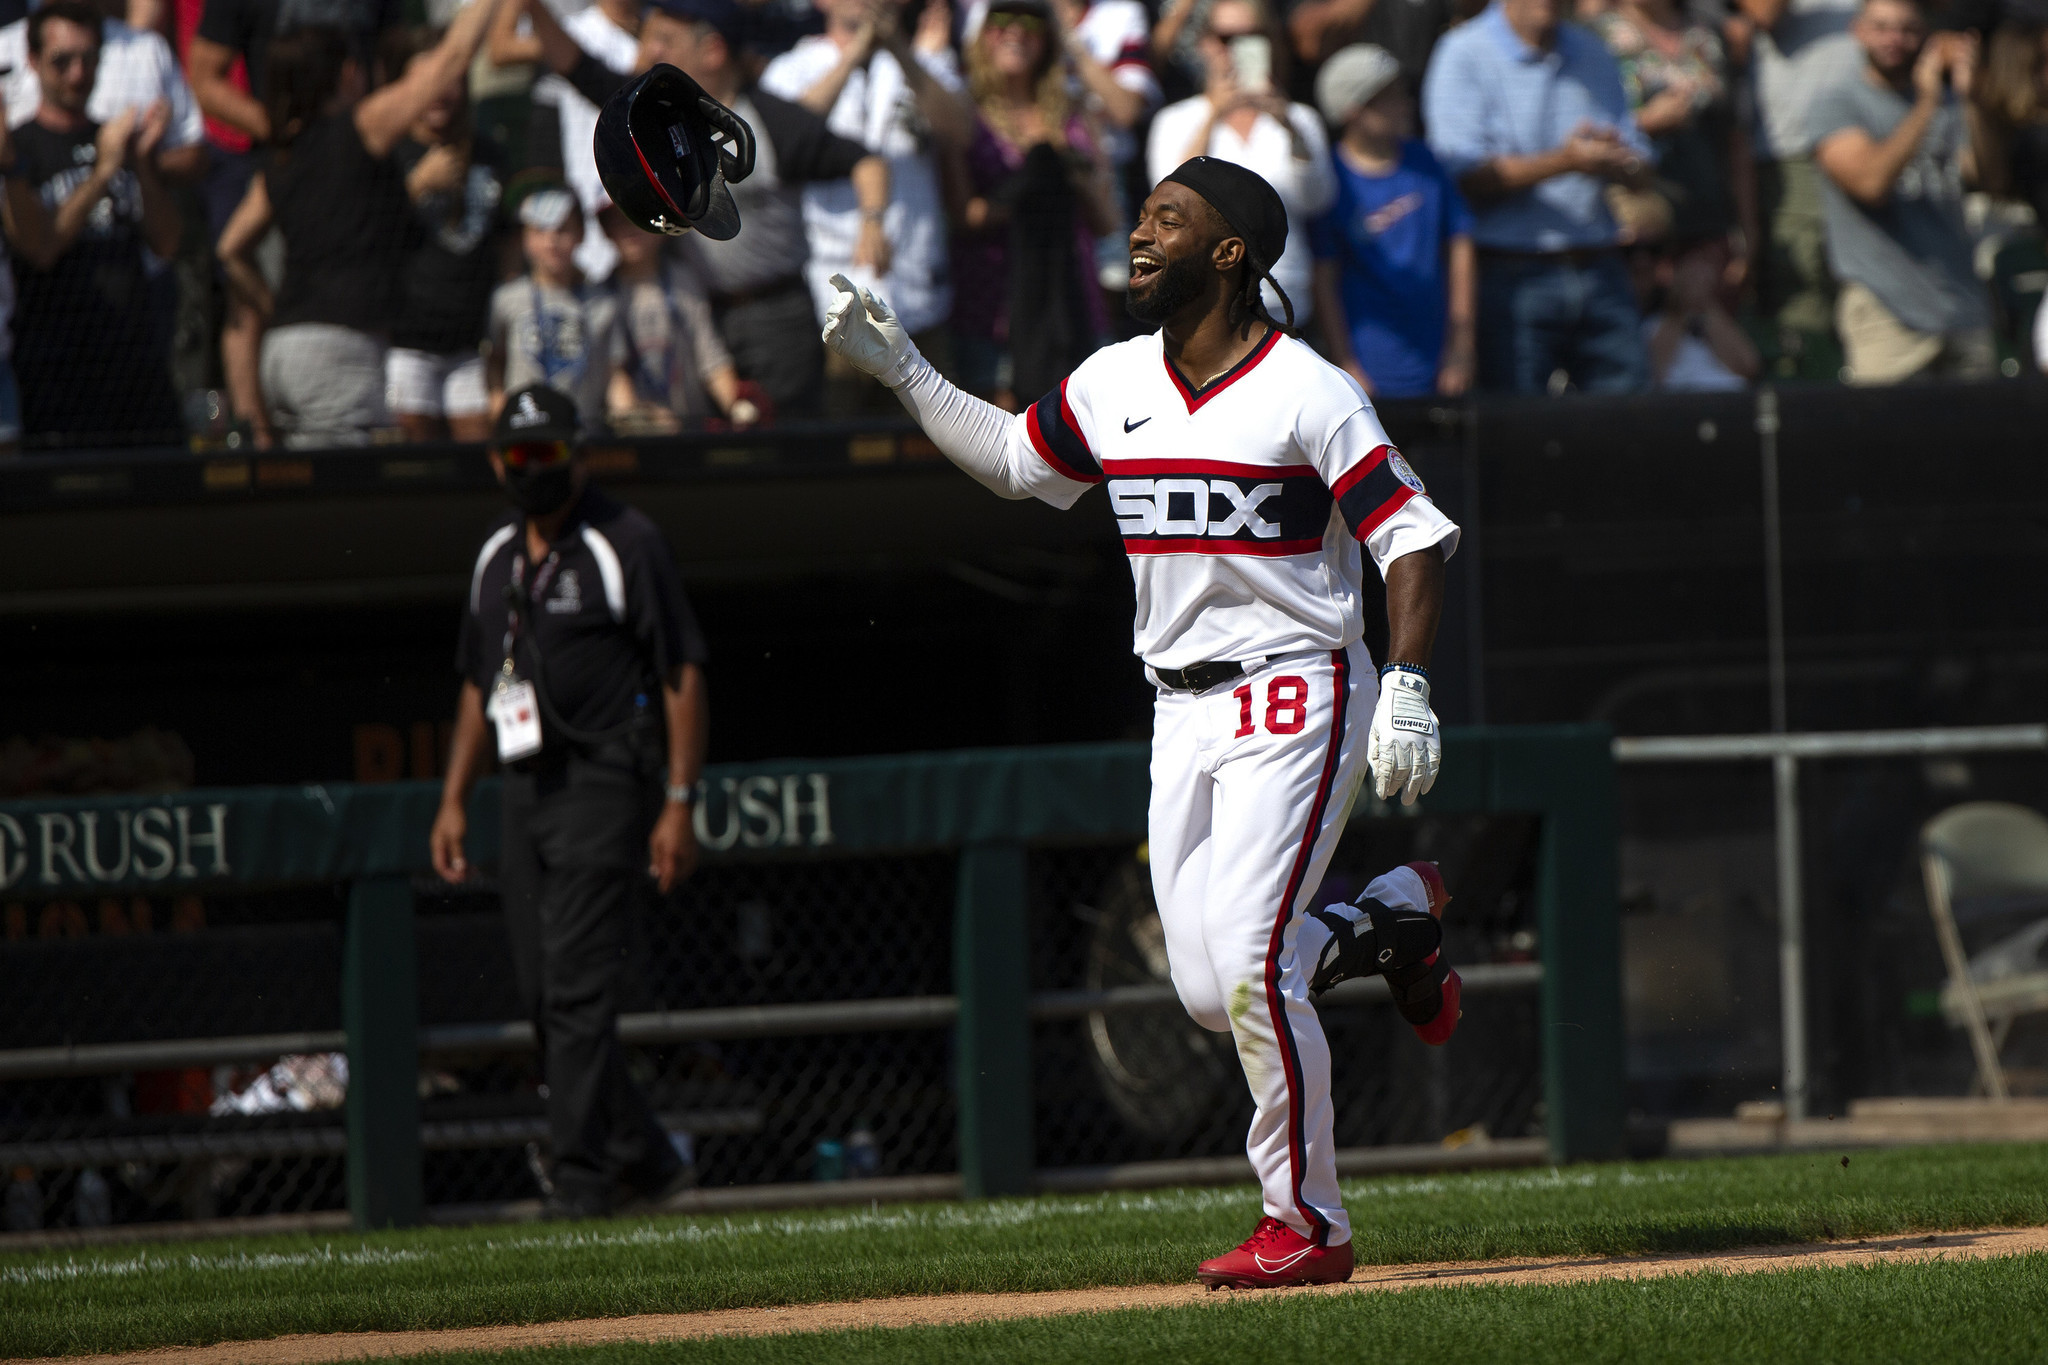 White Sox Go Retro with 1983 Uniforms at Sunday Home Games